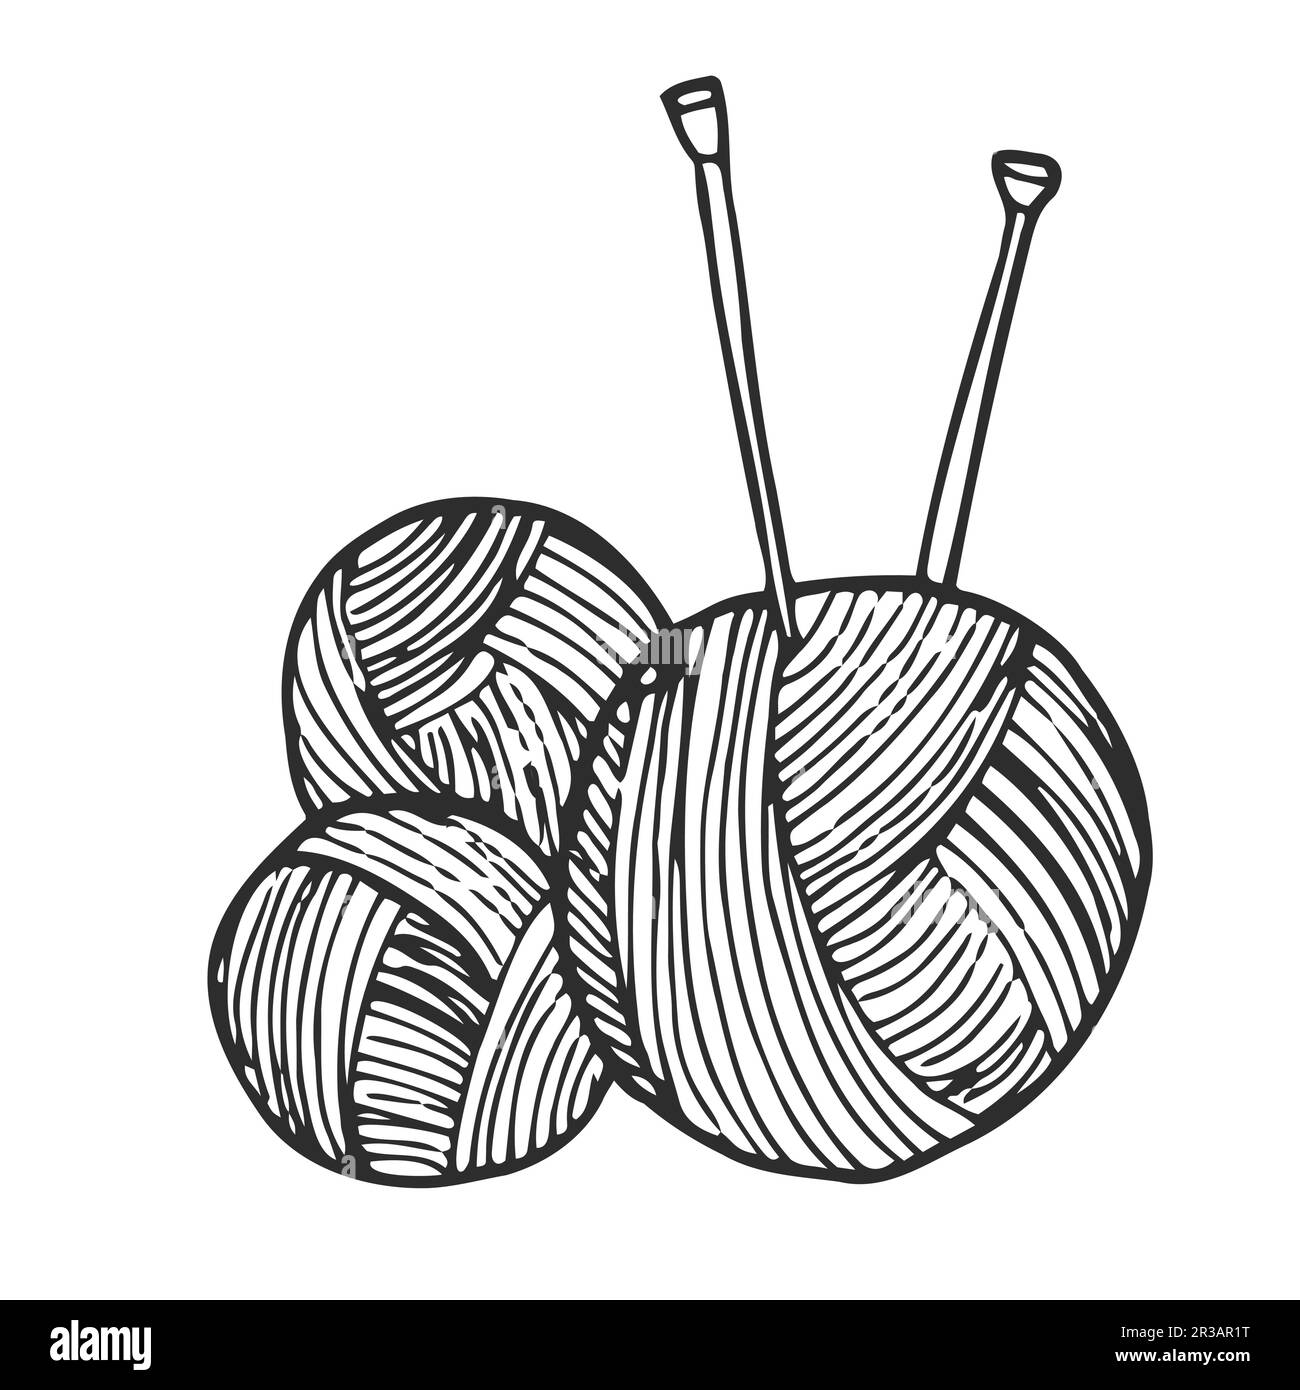 Knitting needles and wool Black and White Stock Photos & Images